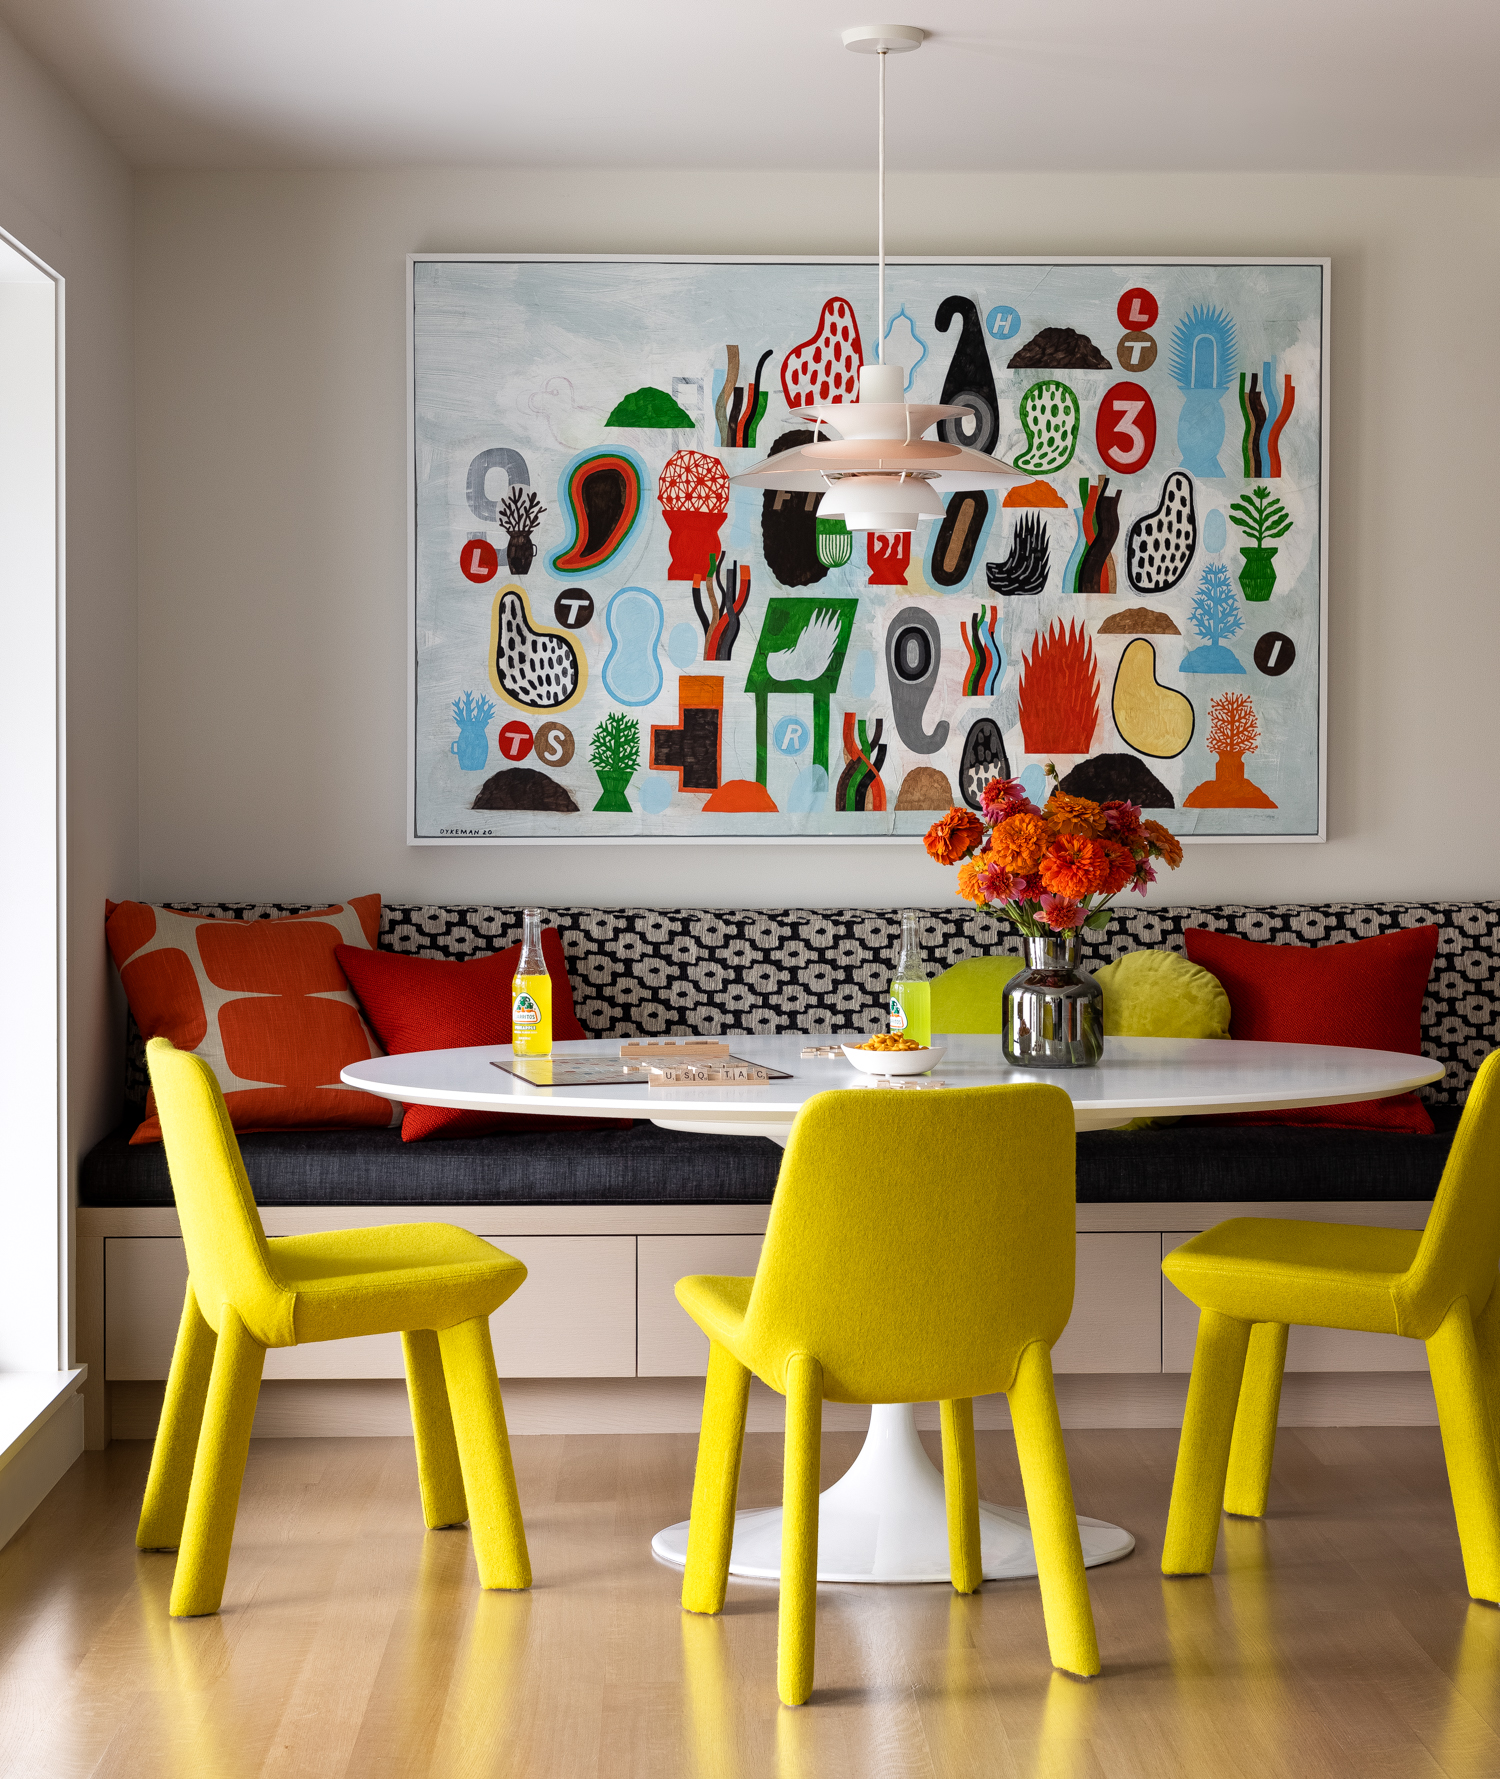 Bright yellow felt wrapped chairs paired with a mid century table and light fixture make a fun, eye-catching design.